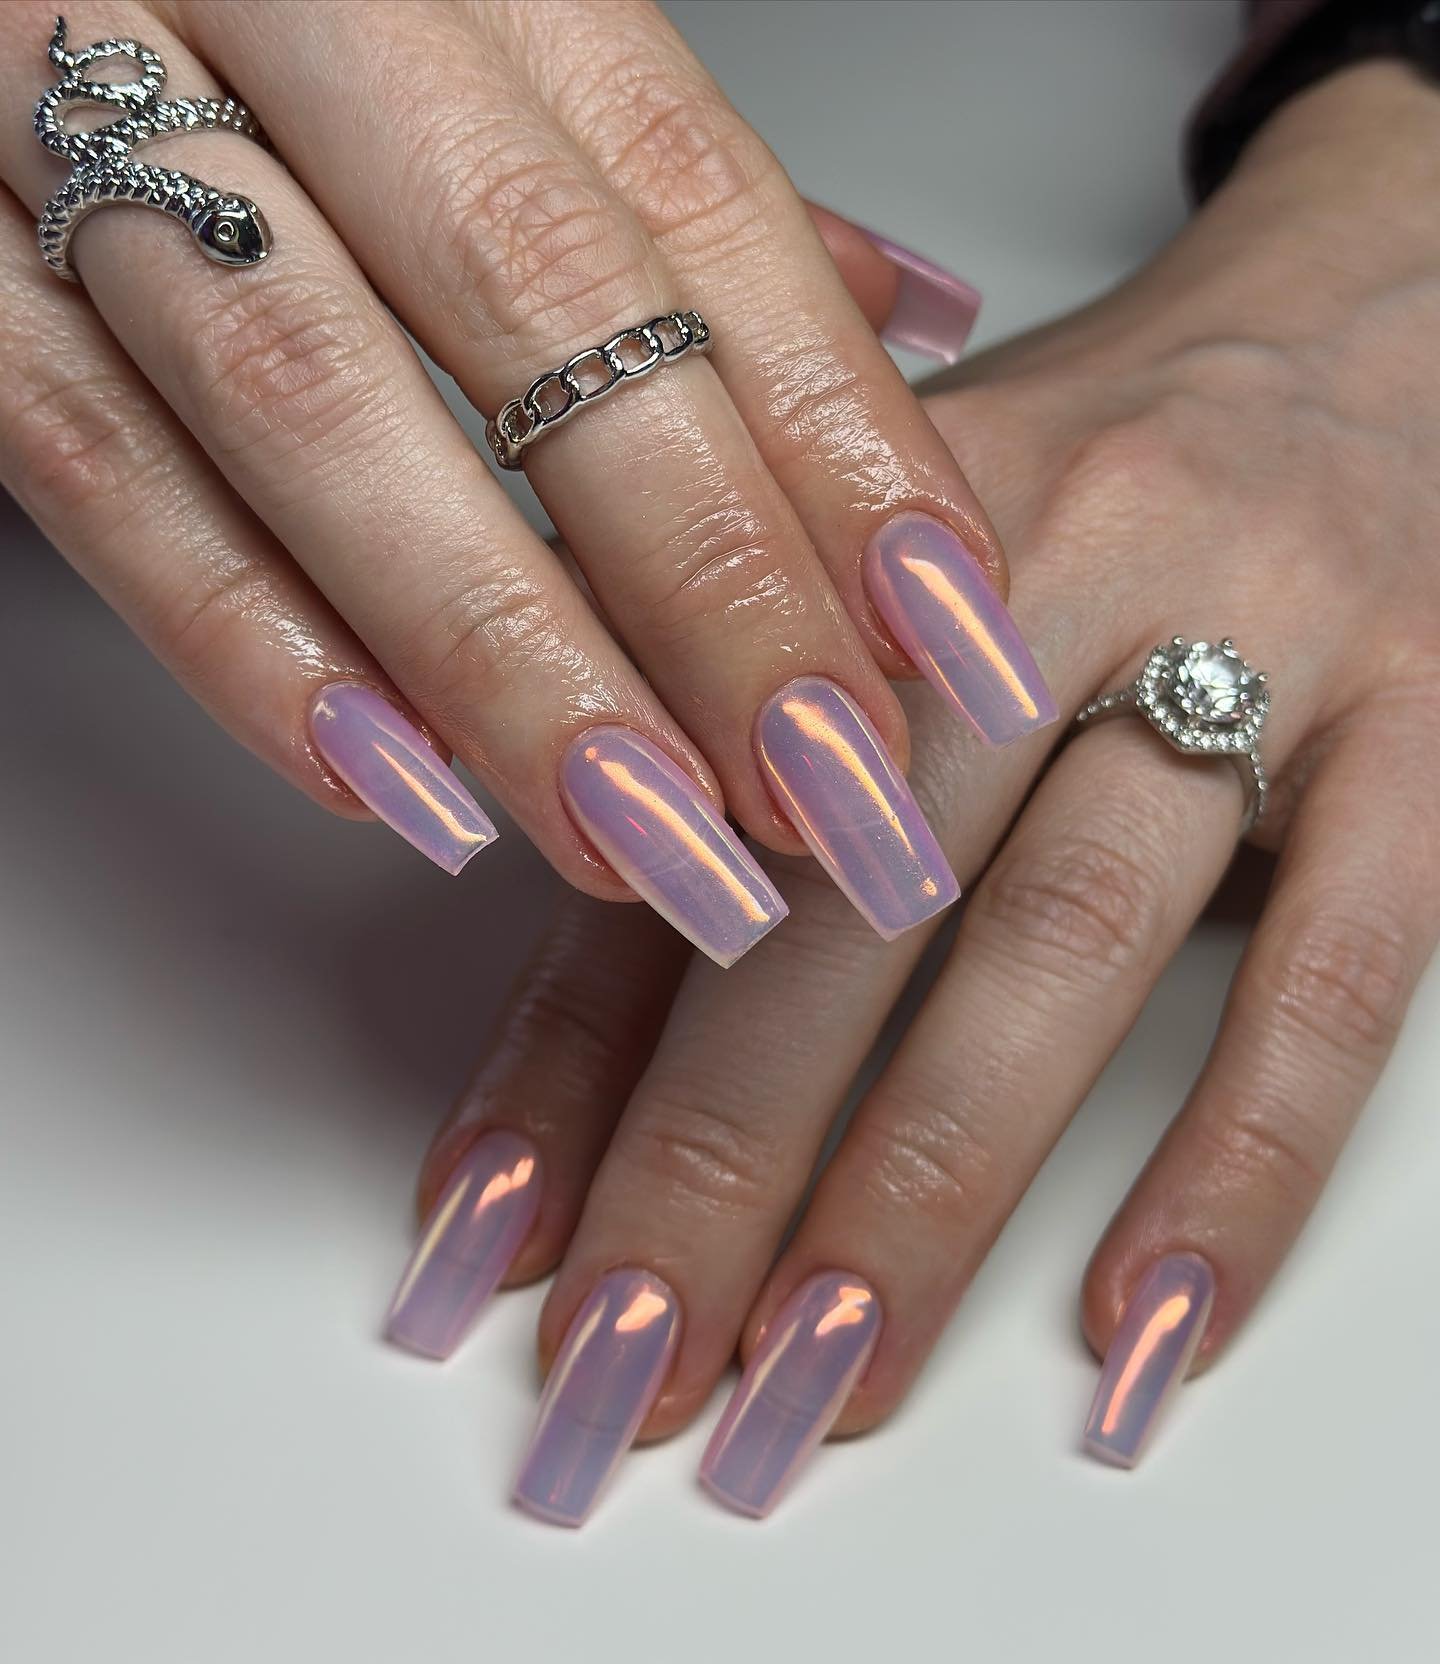 2 - Picture of Pink Chrome Nails